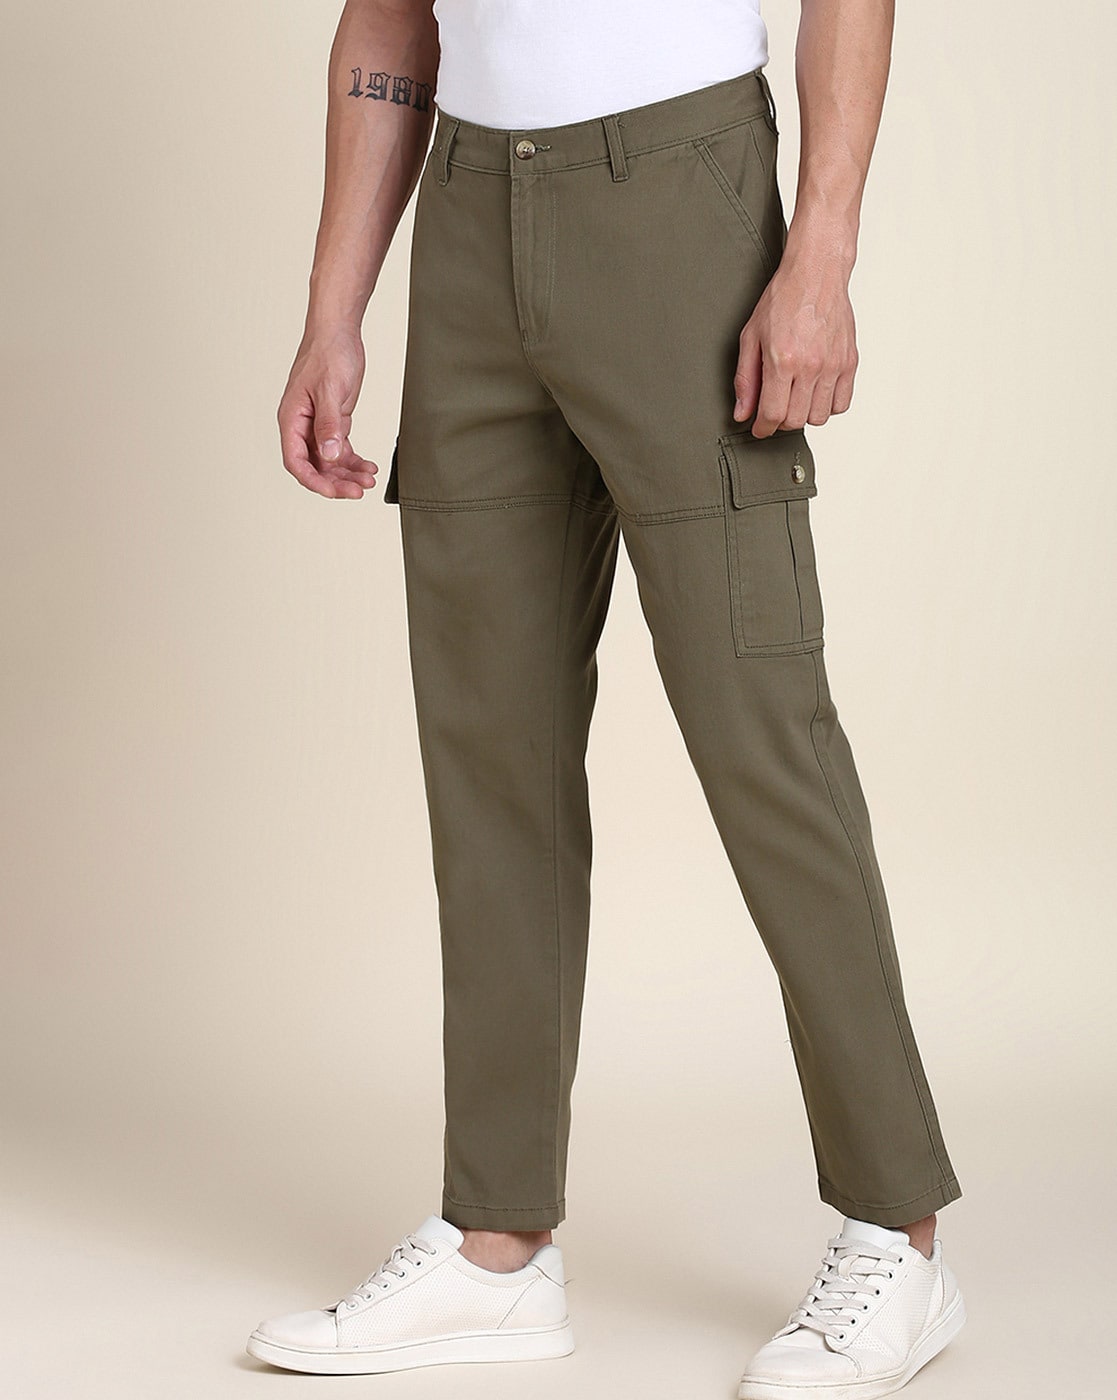 Off White Slim Fit Cargo Trousers | New Look